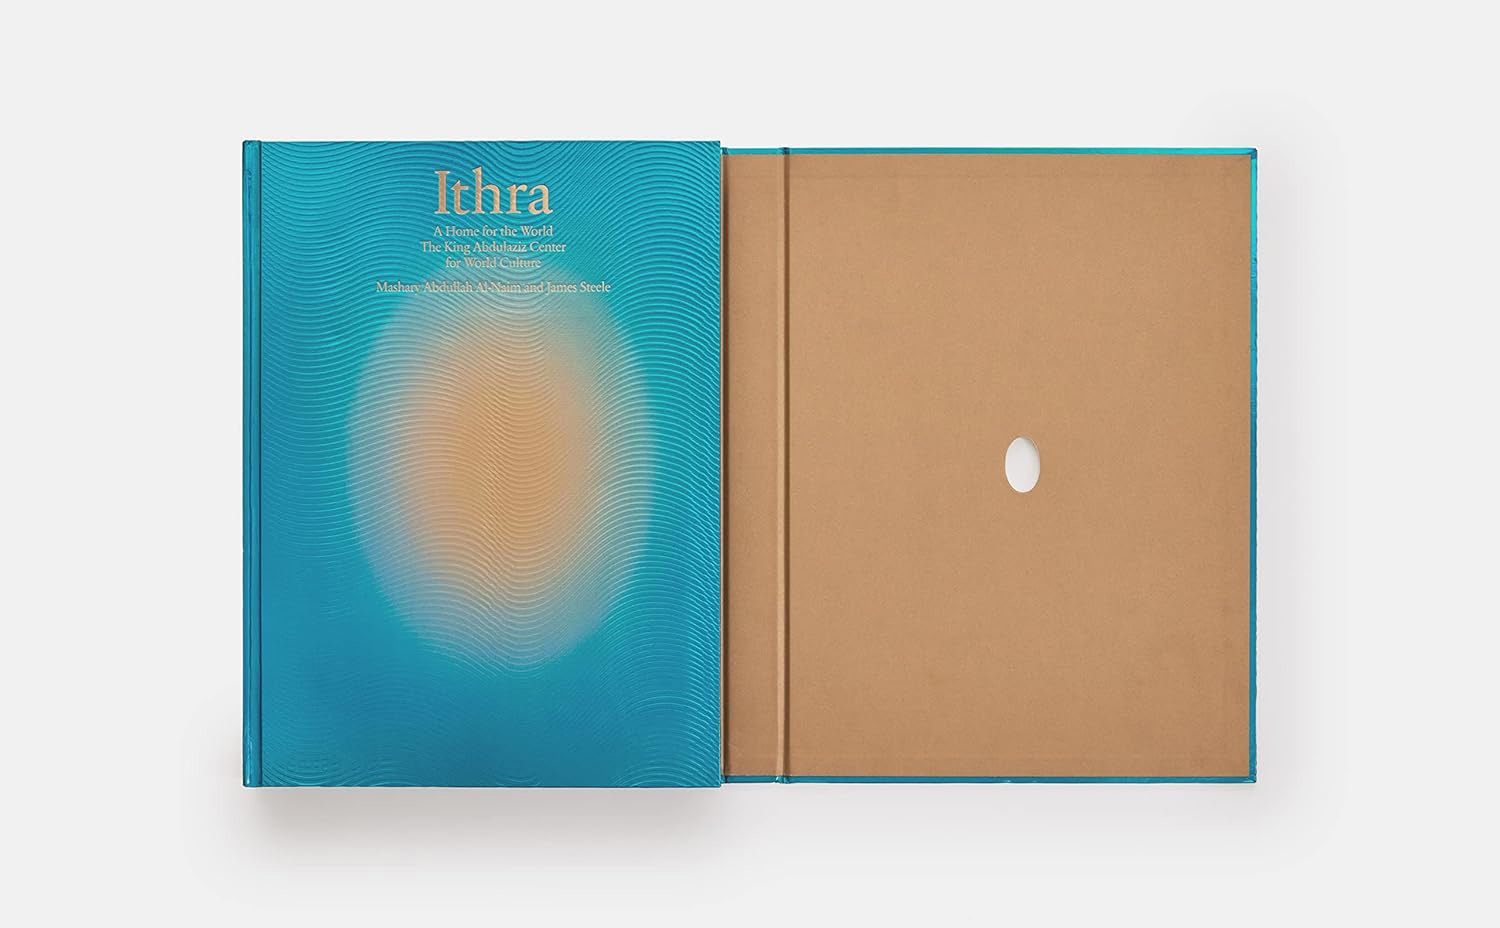 Artbook - Sách Tiếng Anh - Ithra: A Home for the World